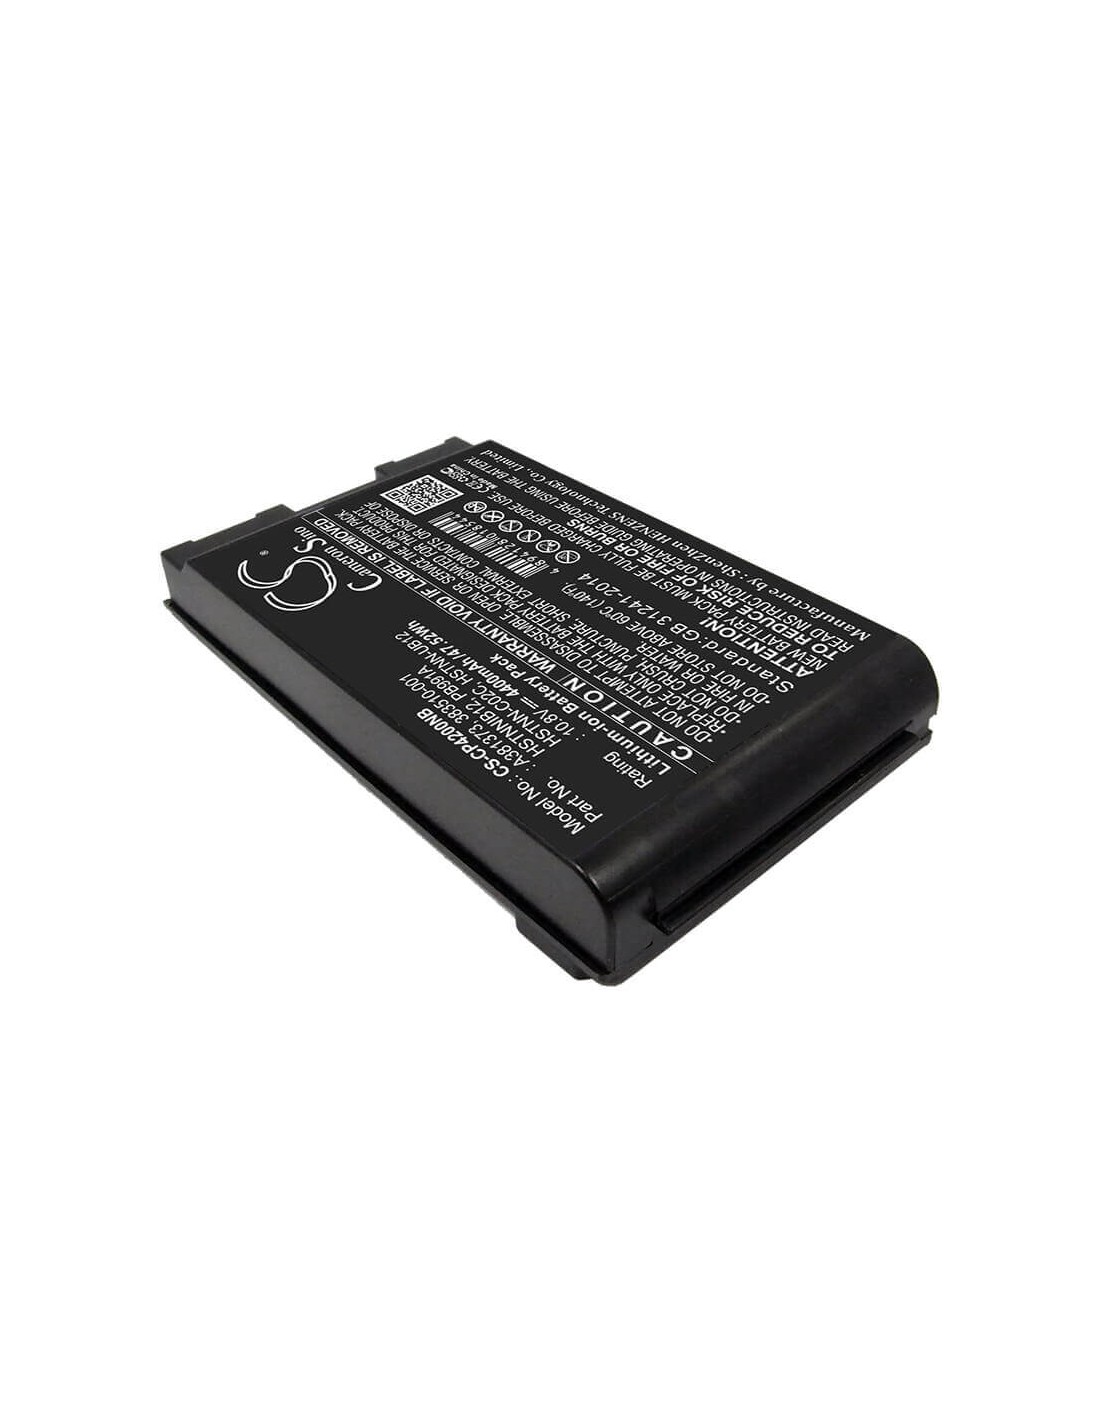 Black Battery for HP Business Notebook NC4400, Business Notebook TC4200, Business Notebook TC4400 10.8V, 4400mAh - 47.52Wh